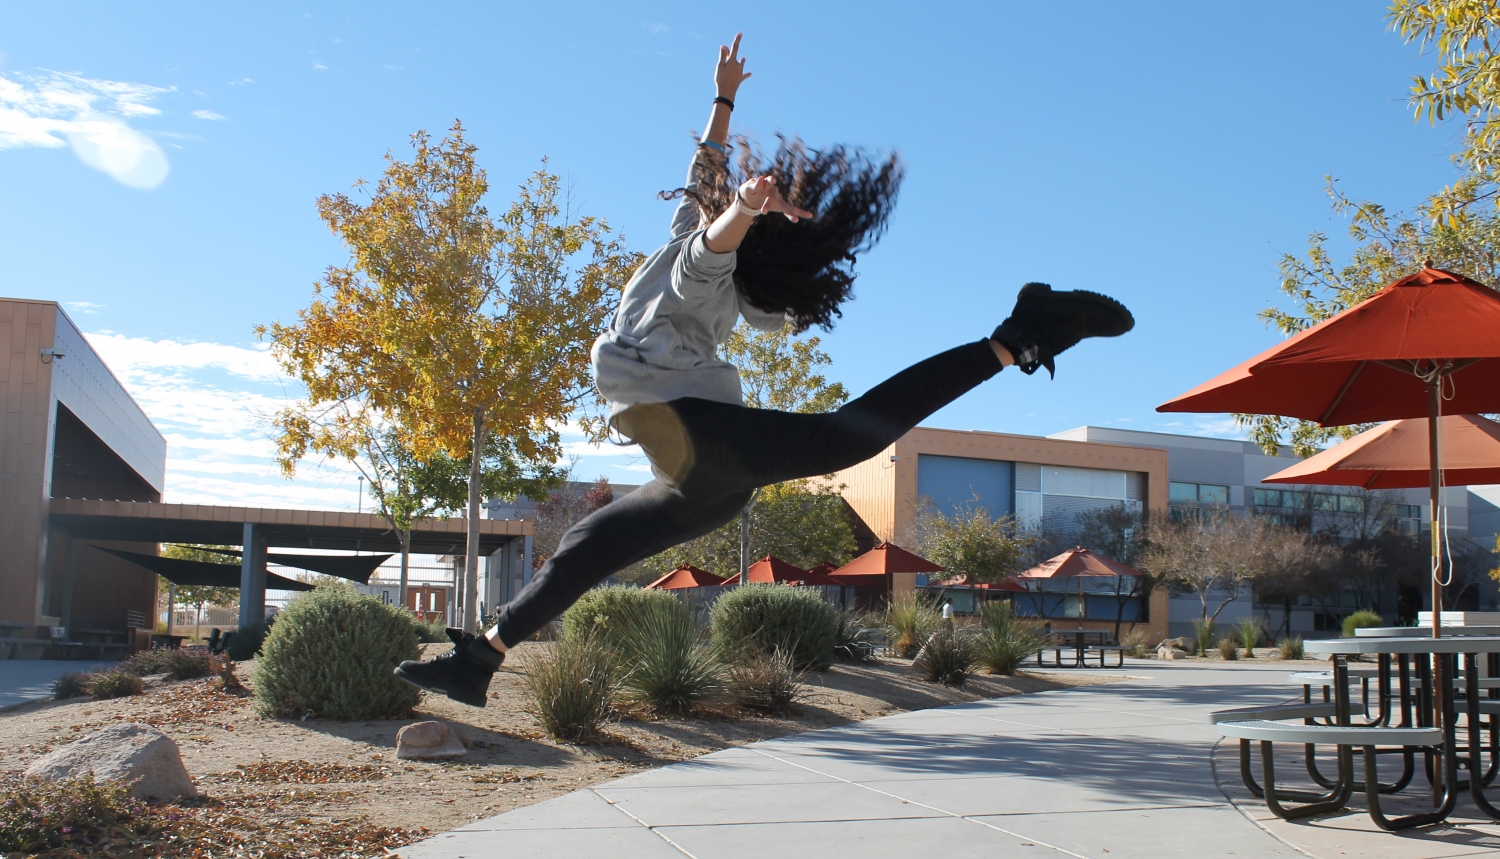 Practicing around campus, senior Kennedy Nelson shows off one of her moves to express herself. “A few photography students asked me to help them with a few motion photos so I did a few jumps and I attempted a leap,” Nelson said. Photo Credit: Maya Negash 